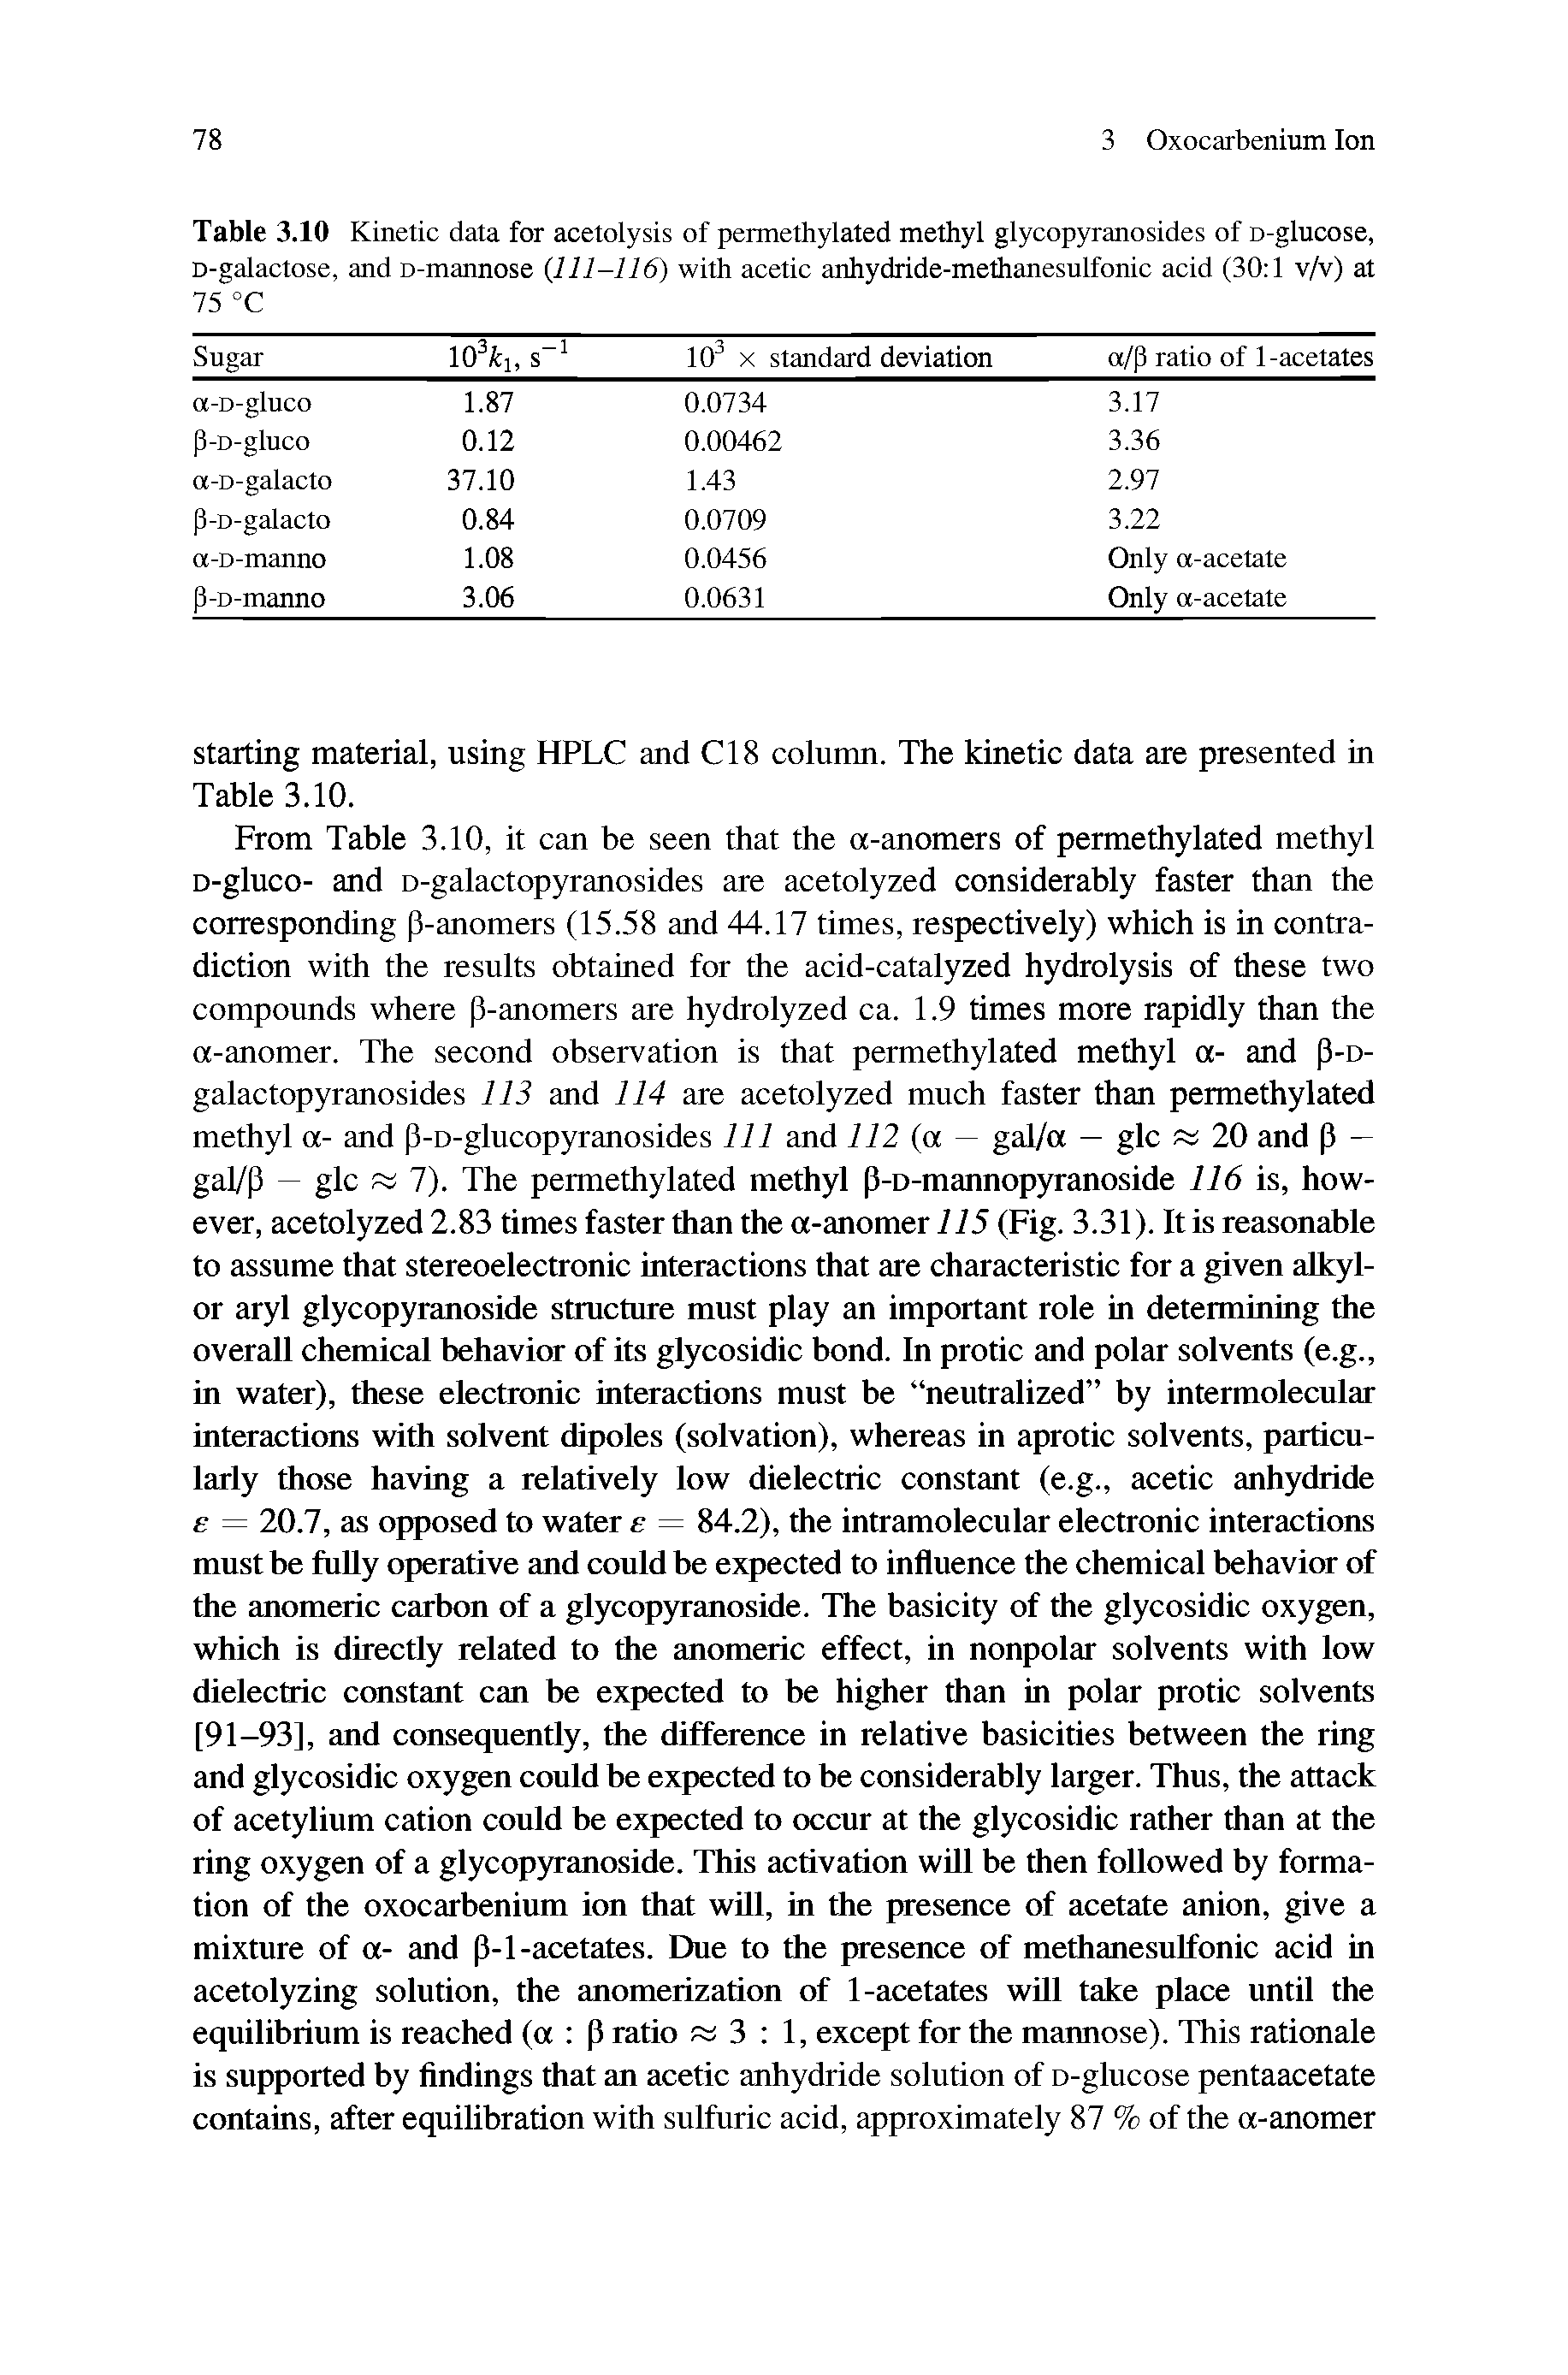 Table 3.10 Kinetic data for acetolysis of pennethylated methyl glycopyranosides of D-glucose, D-galactose, and D-mannose (111-116) with acetic anhydride-methanesulfonic acid (30 1 v/v) at 75 °C...